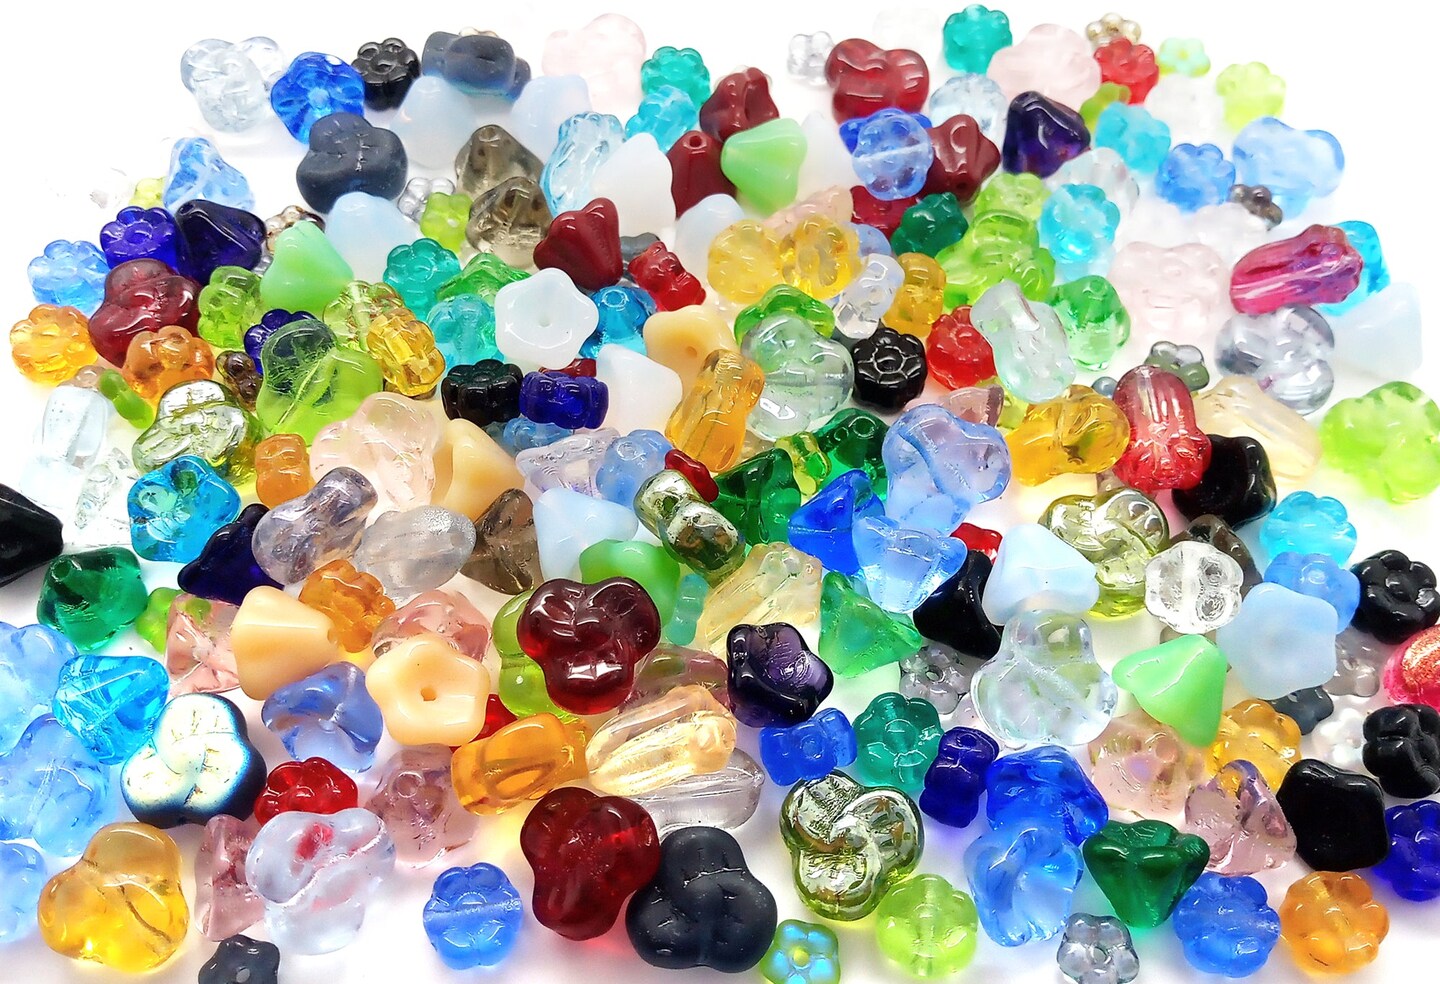 Glass Flower Beads Assortment, 50 pieces, Mix of Colors and Styles, Adorabilities